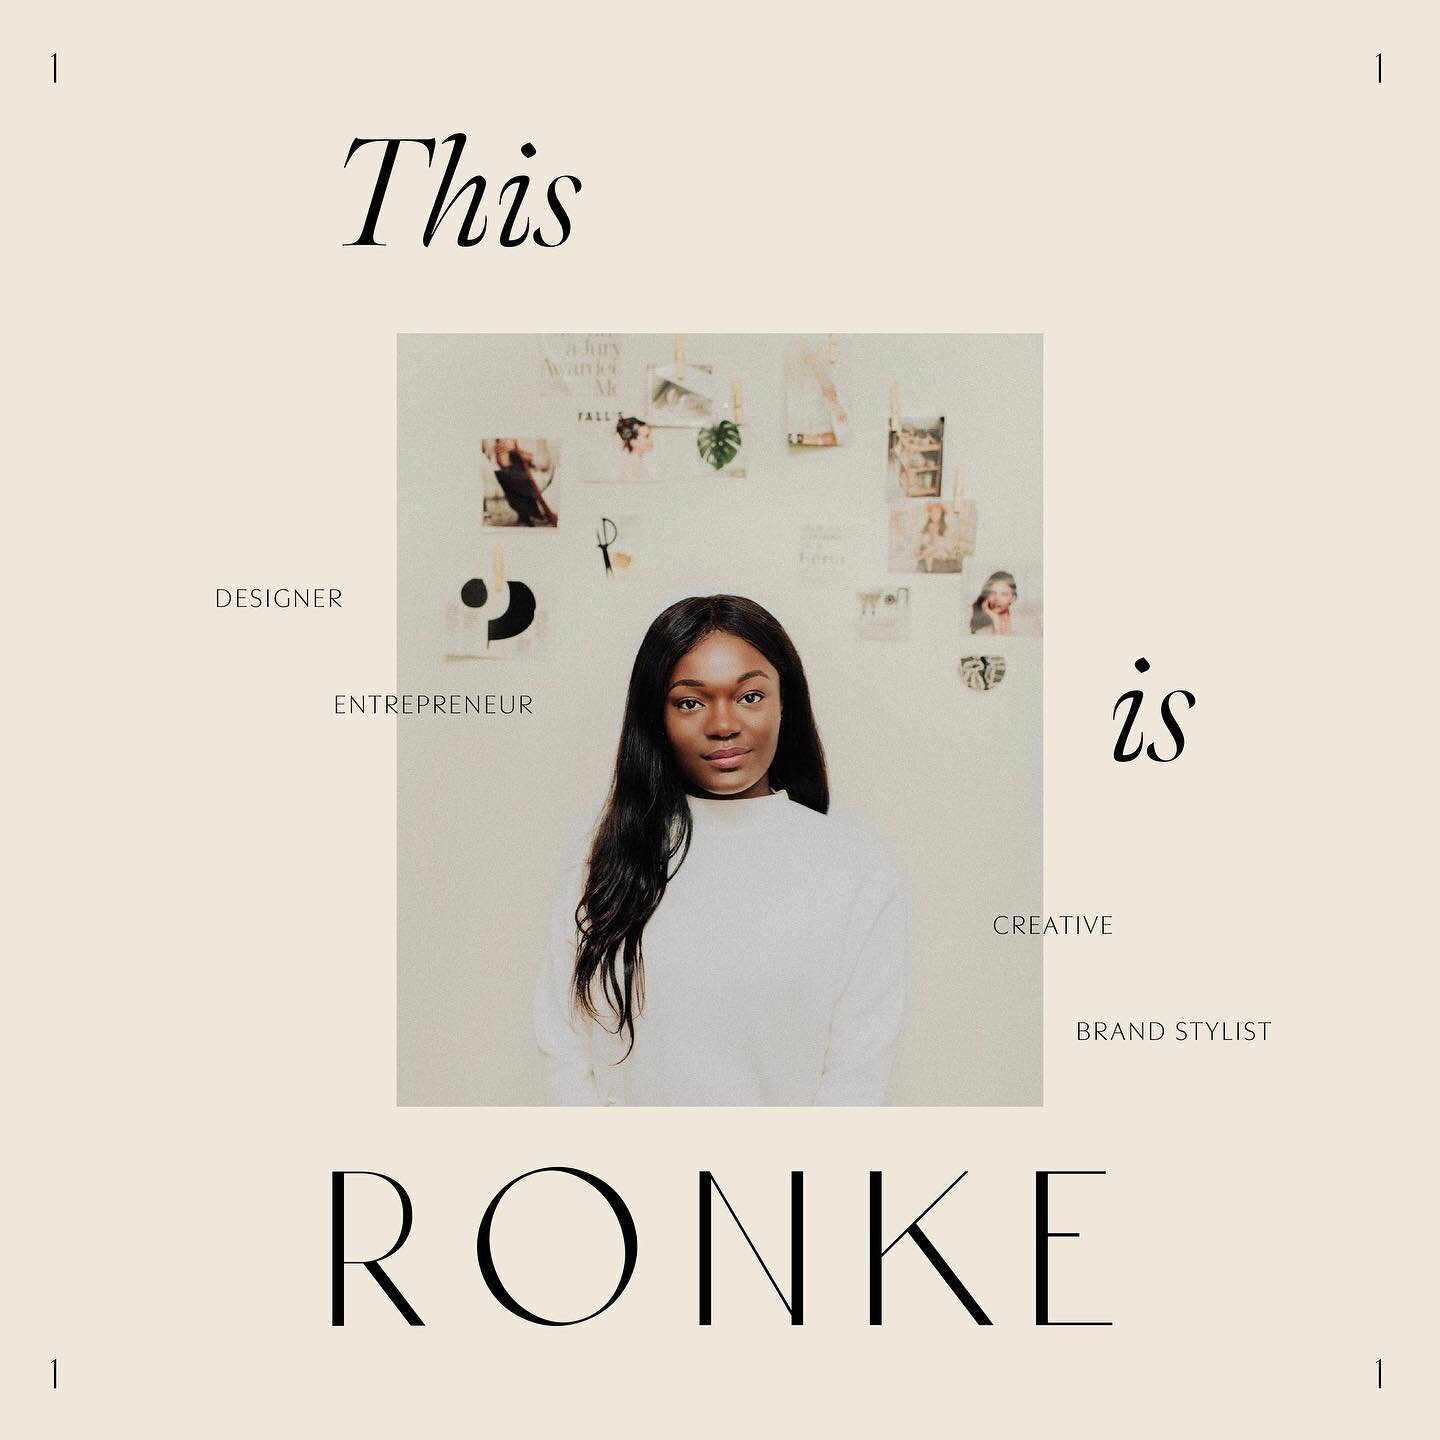 Meet Ronke, the first feature of our series dedicated to recognizing and celebrating Black History Month. 

Follow along for the rest of February as we introduce an influential Black creative that has inspired us with and beyond their work. 

Apart f